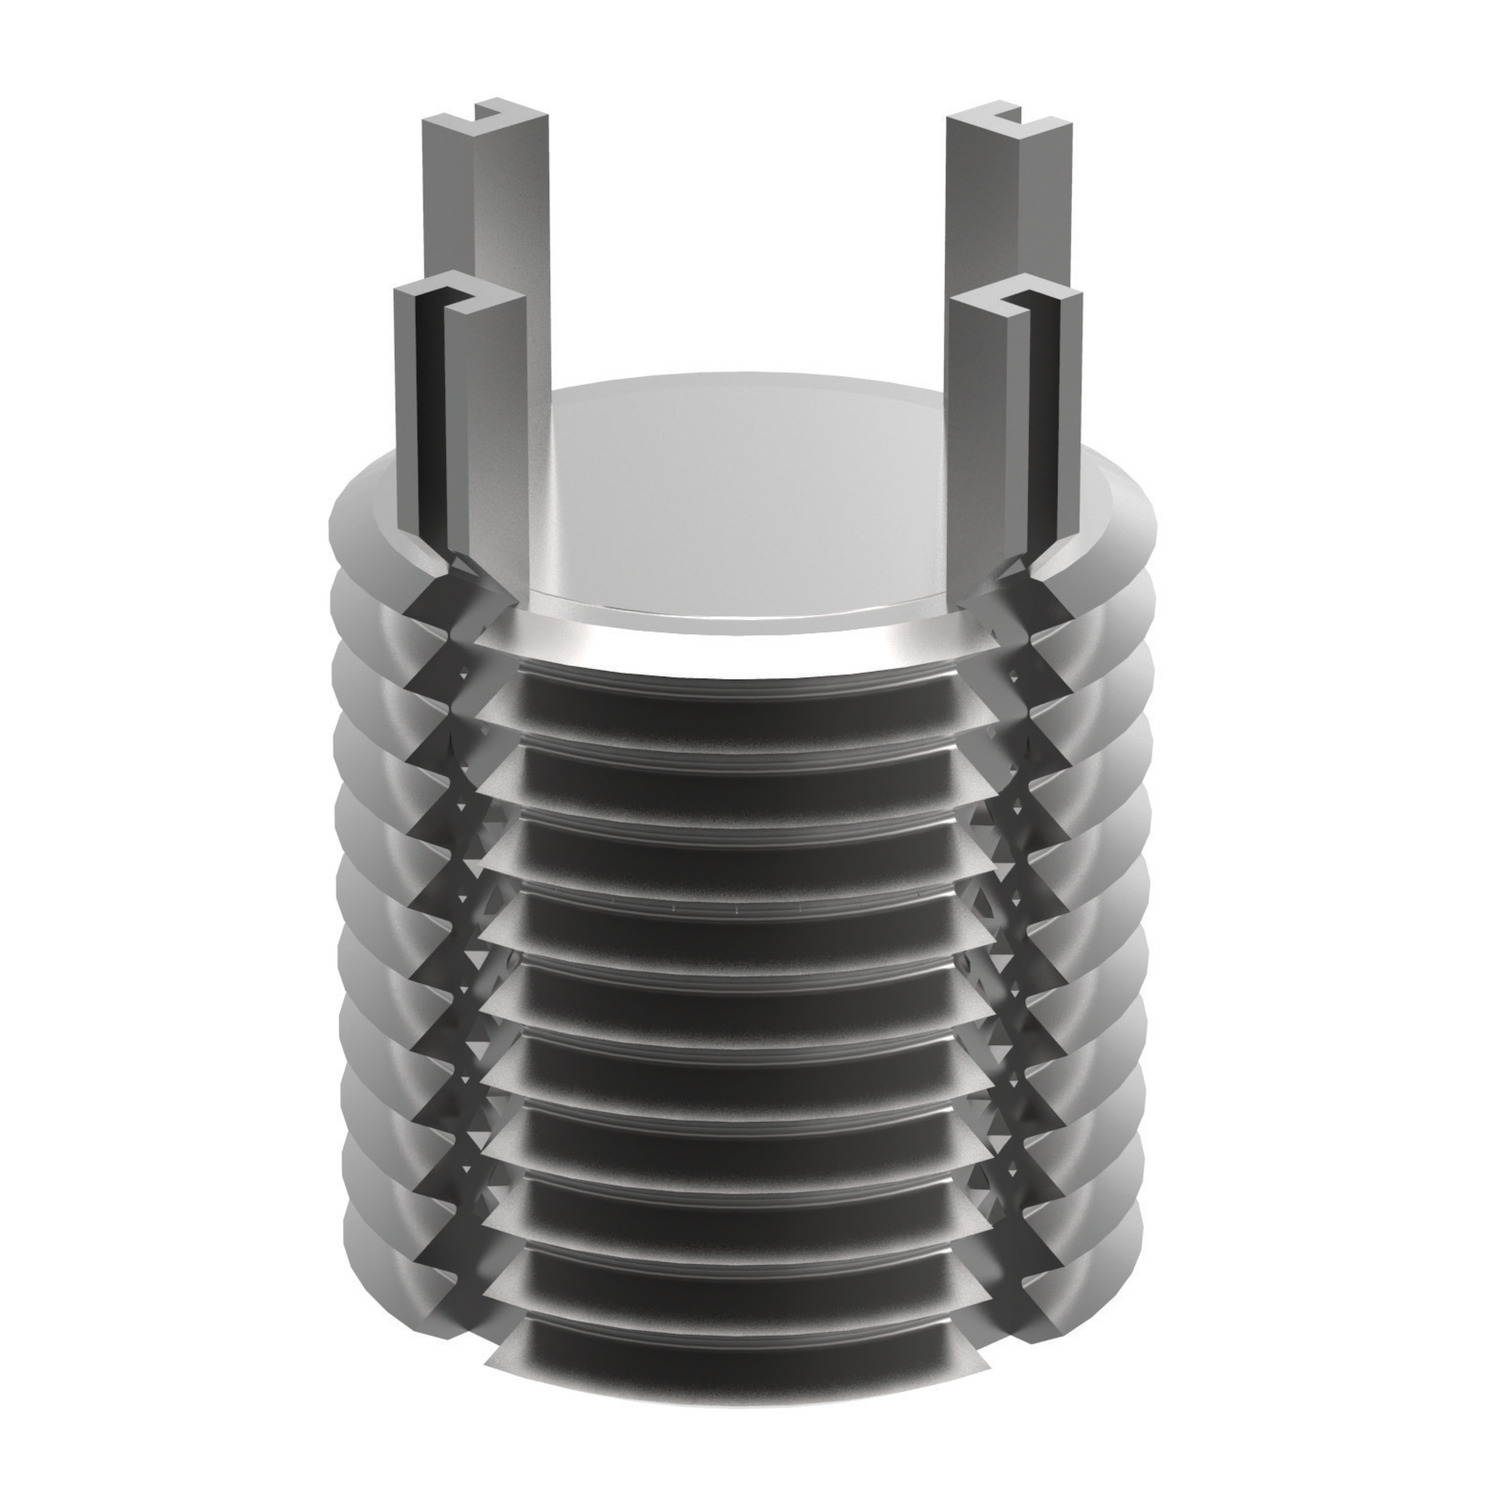 P0087.160-150-A2 Solid Threaded Insert - SS. 